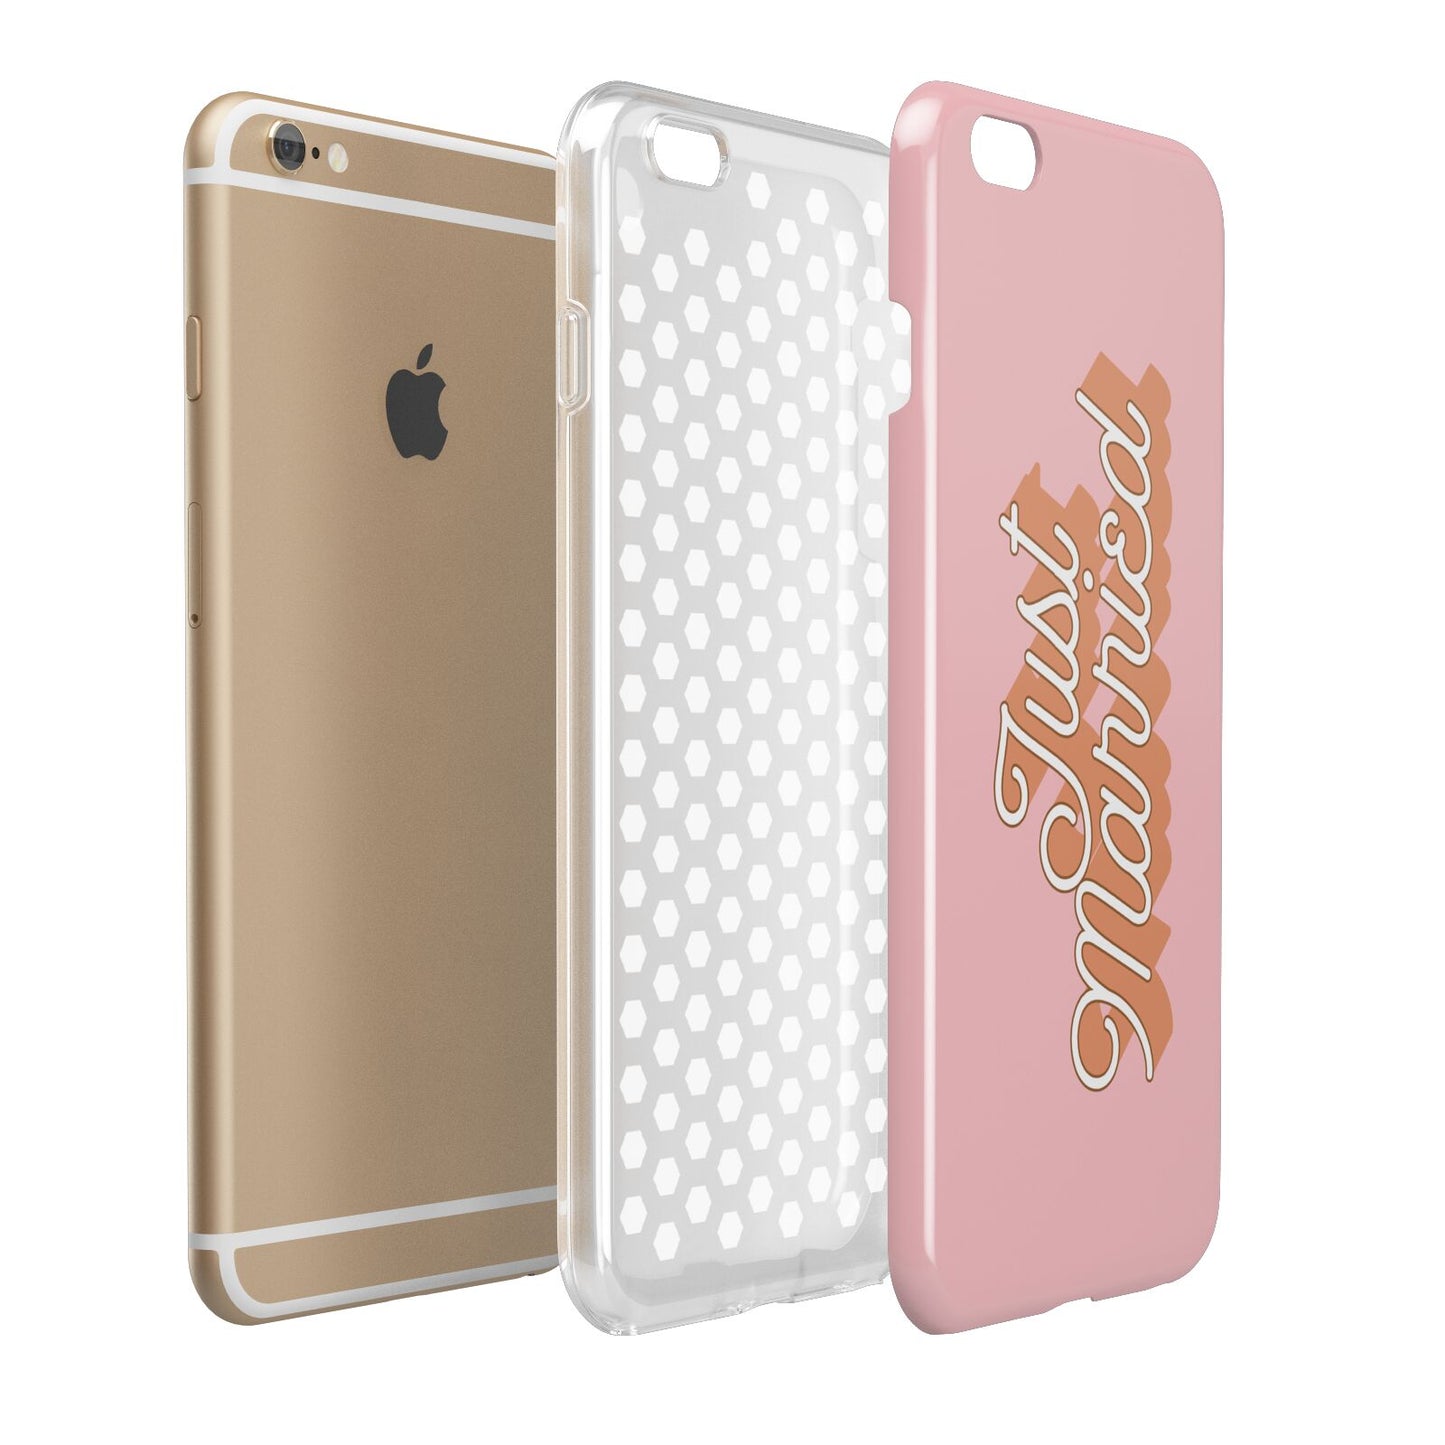 Just Married Pink Apple iPhone 6 Plus 3D Tough Case Expand Detail Image